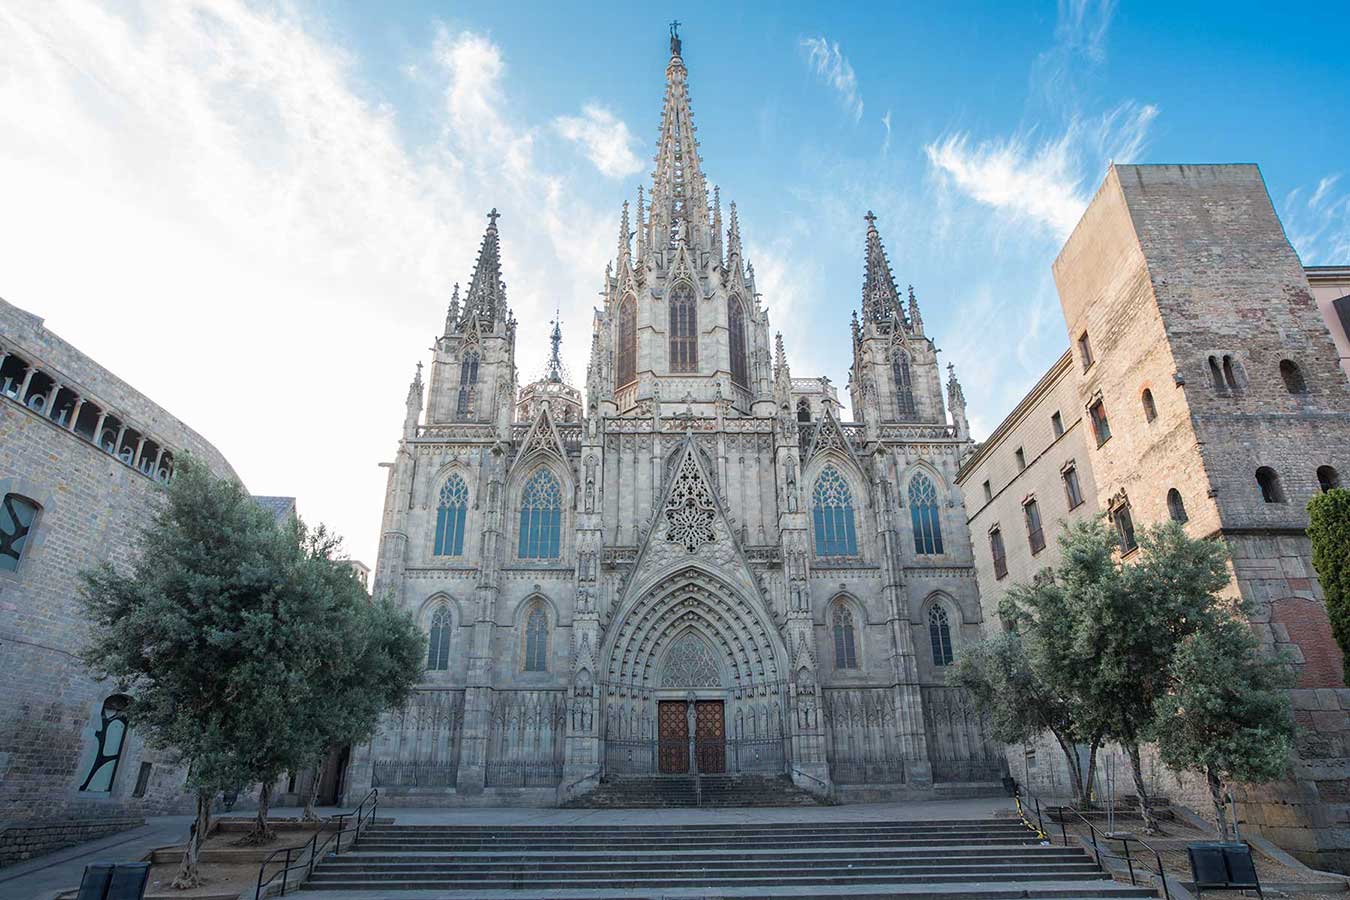 The cathedral of Barcelona - Santa Eulalia and the Holy Cross